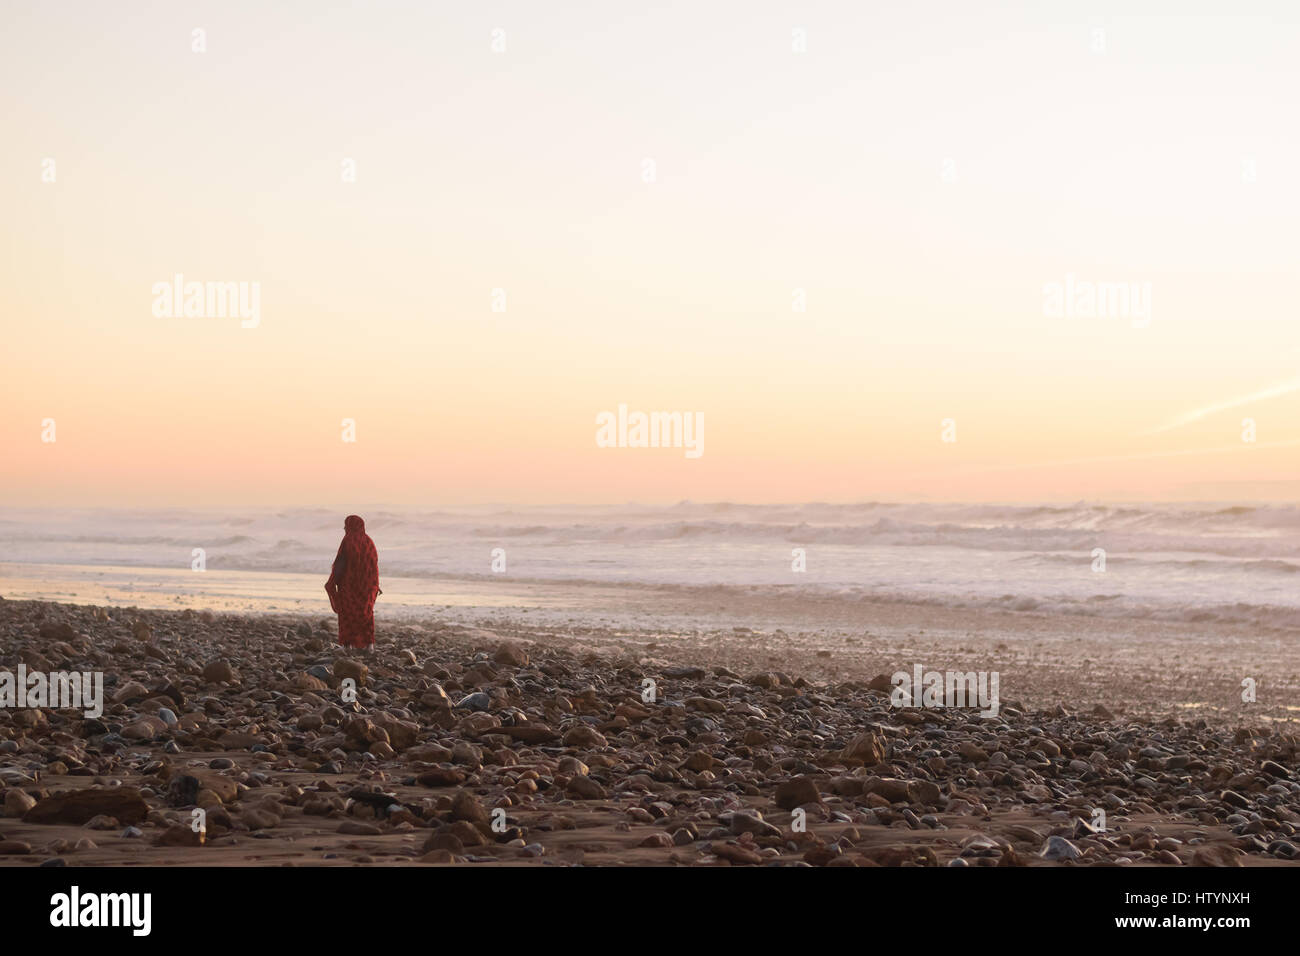 A woman in a red dress walking at the beach at sunset in Morocco. Stock Photo